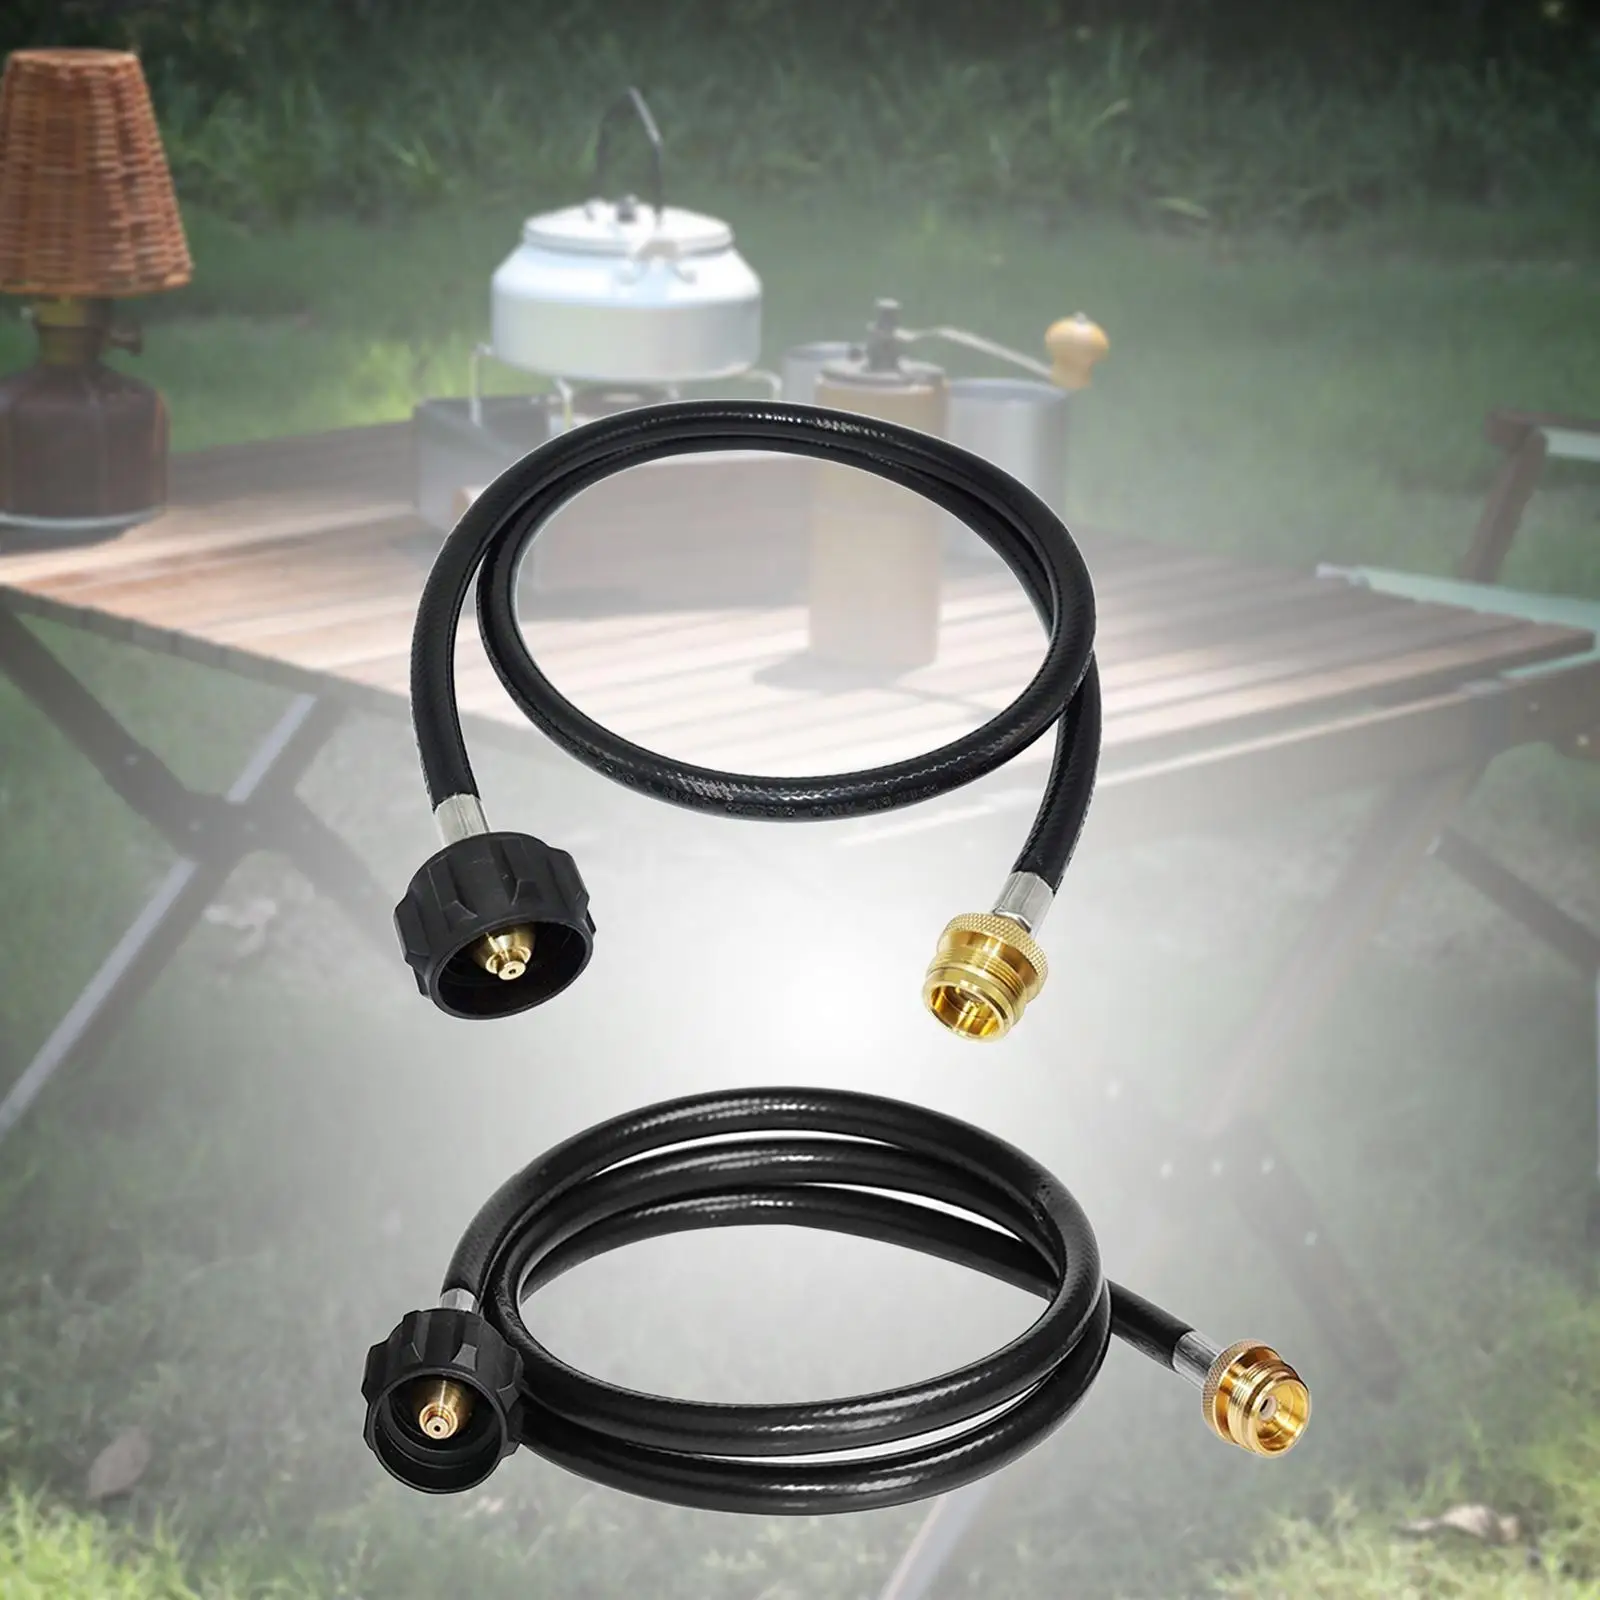 Adapter with Hose, Hose Replacement, Kitchen Parts, Portable Refill Adapter, Burner